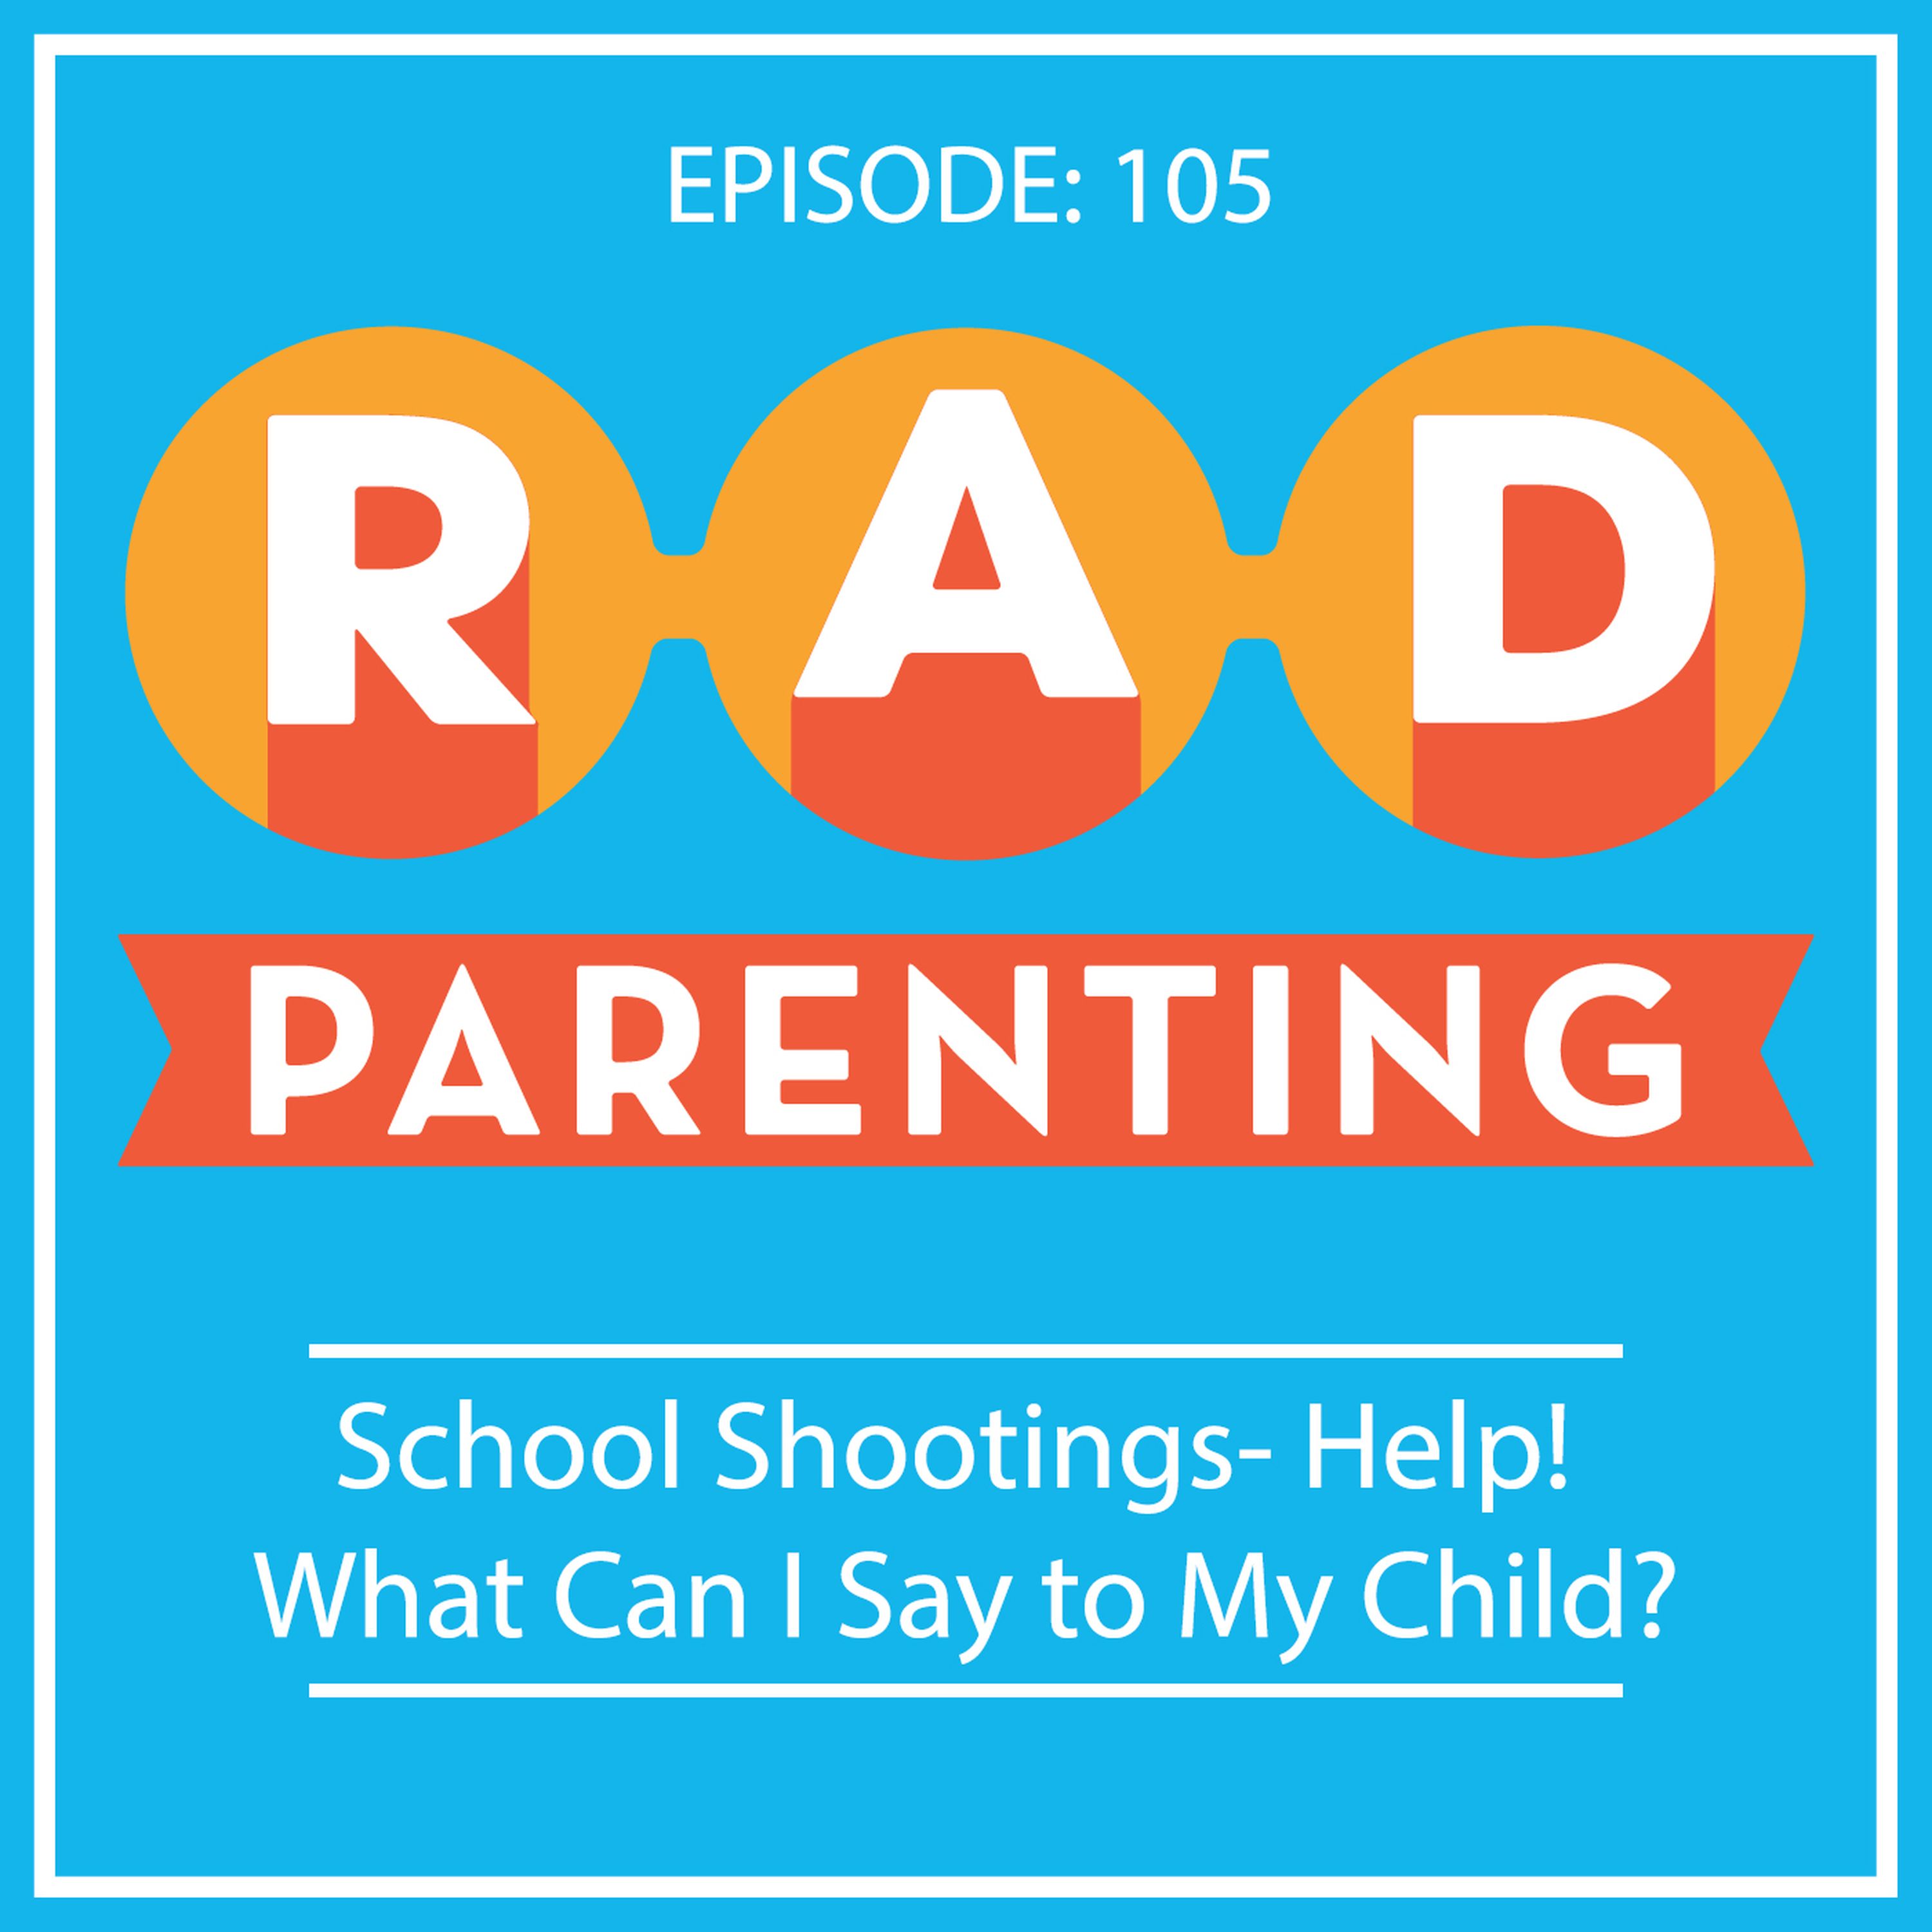 School Shootings and Other Tragedies- Help! What Can I say To My Child?